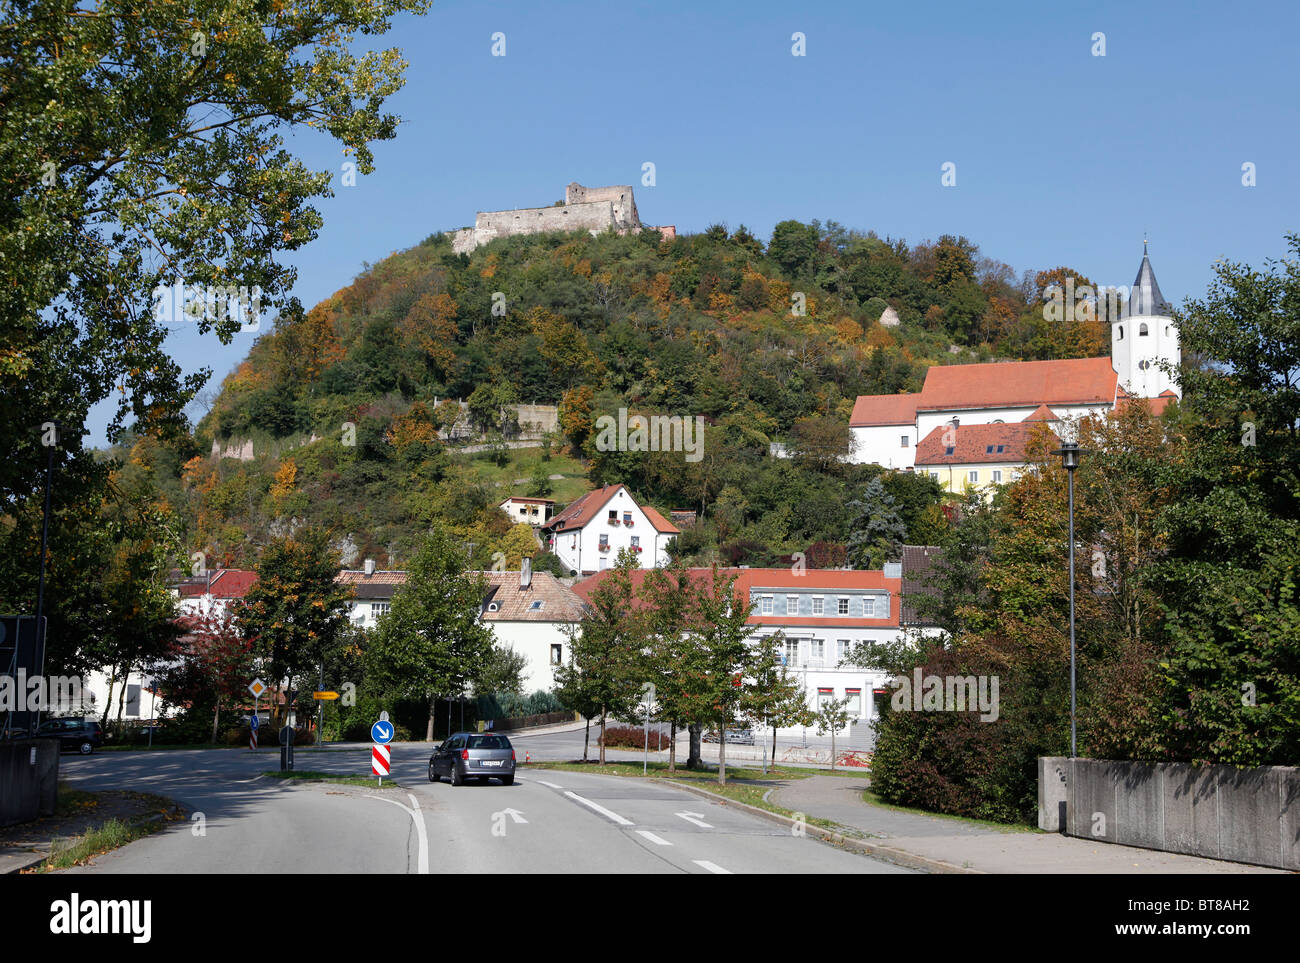 View of the castle ruins in Donaustauf, Bavaria, Germany, Europe Stock Photo